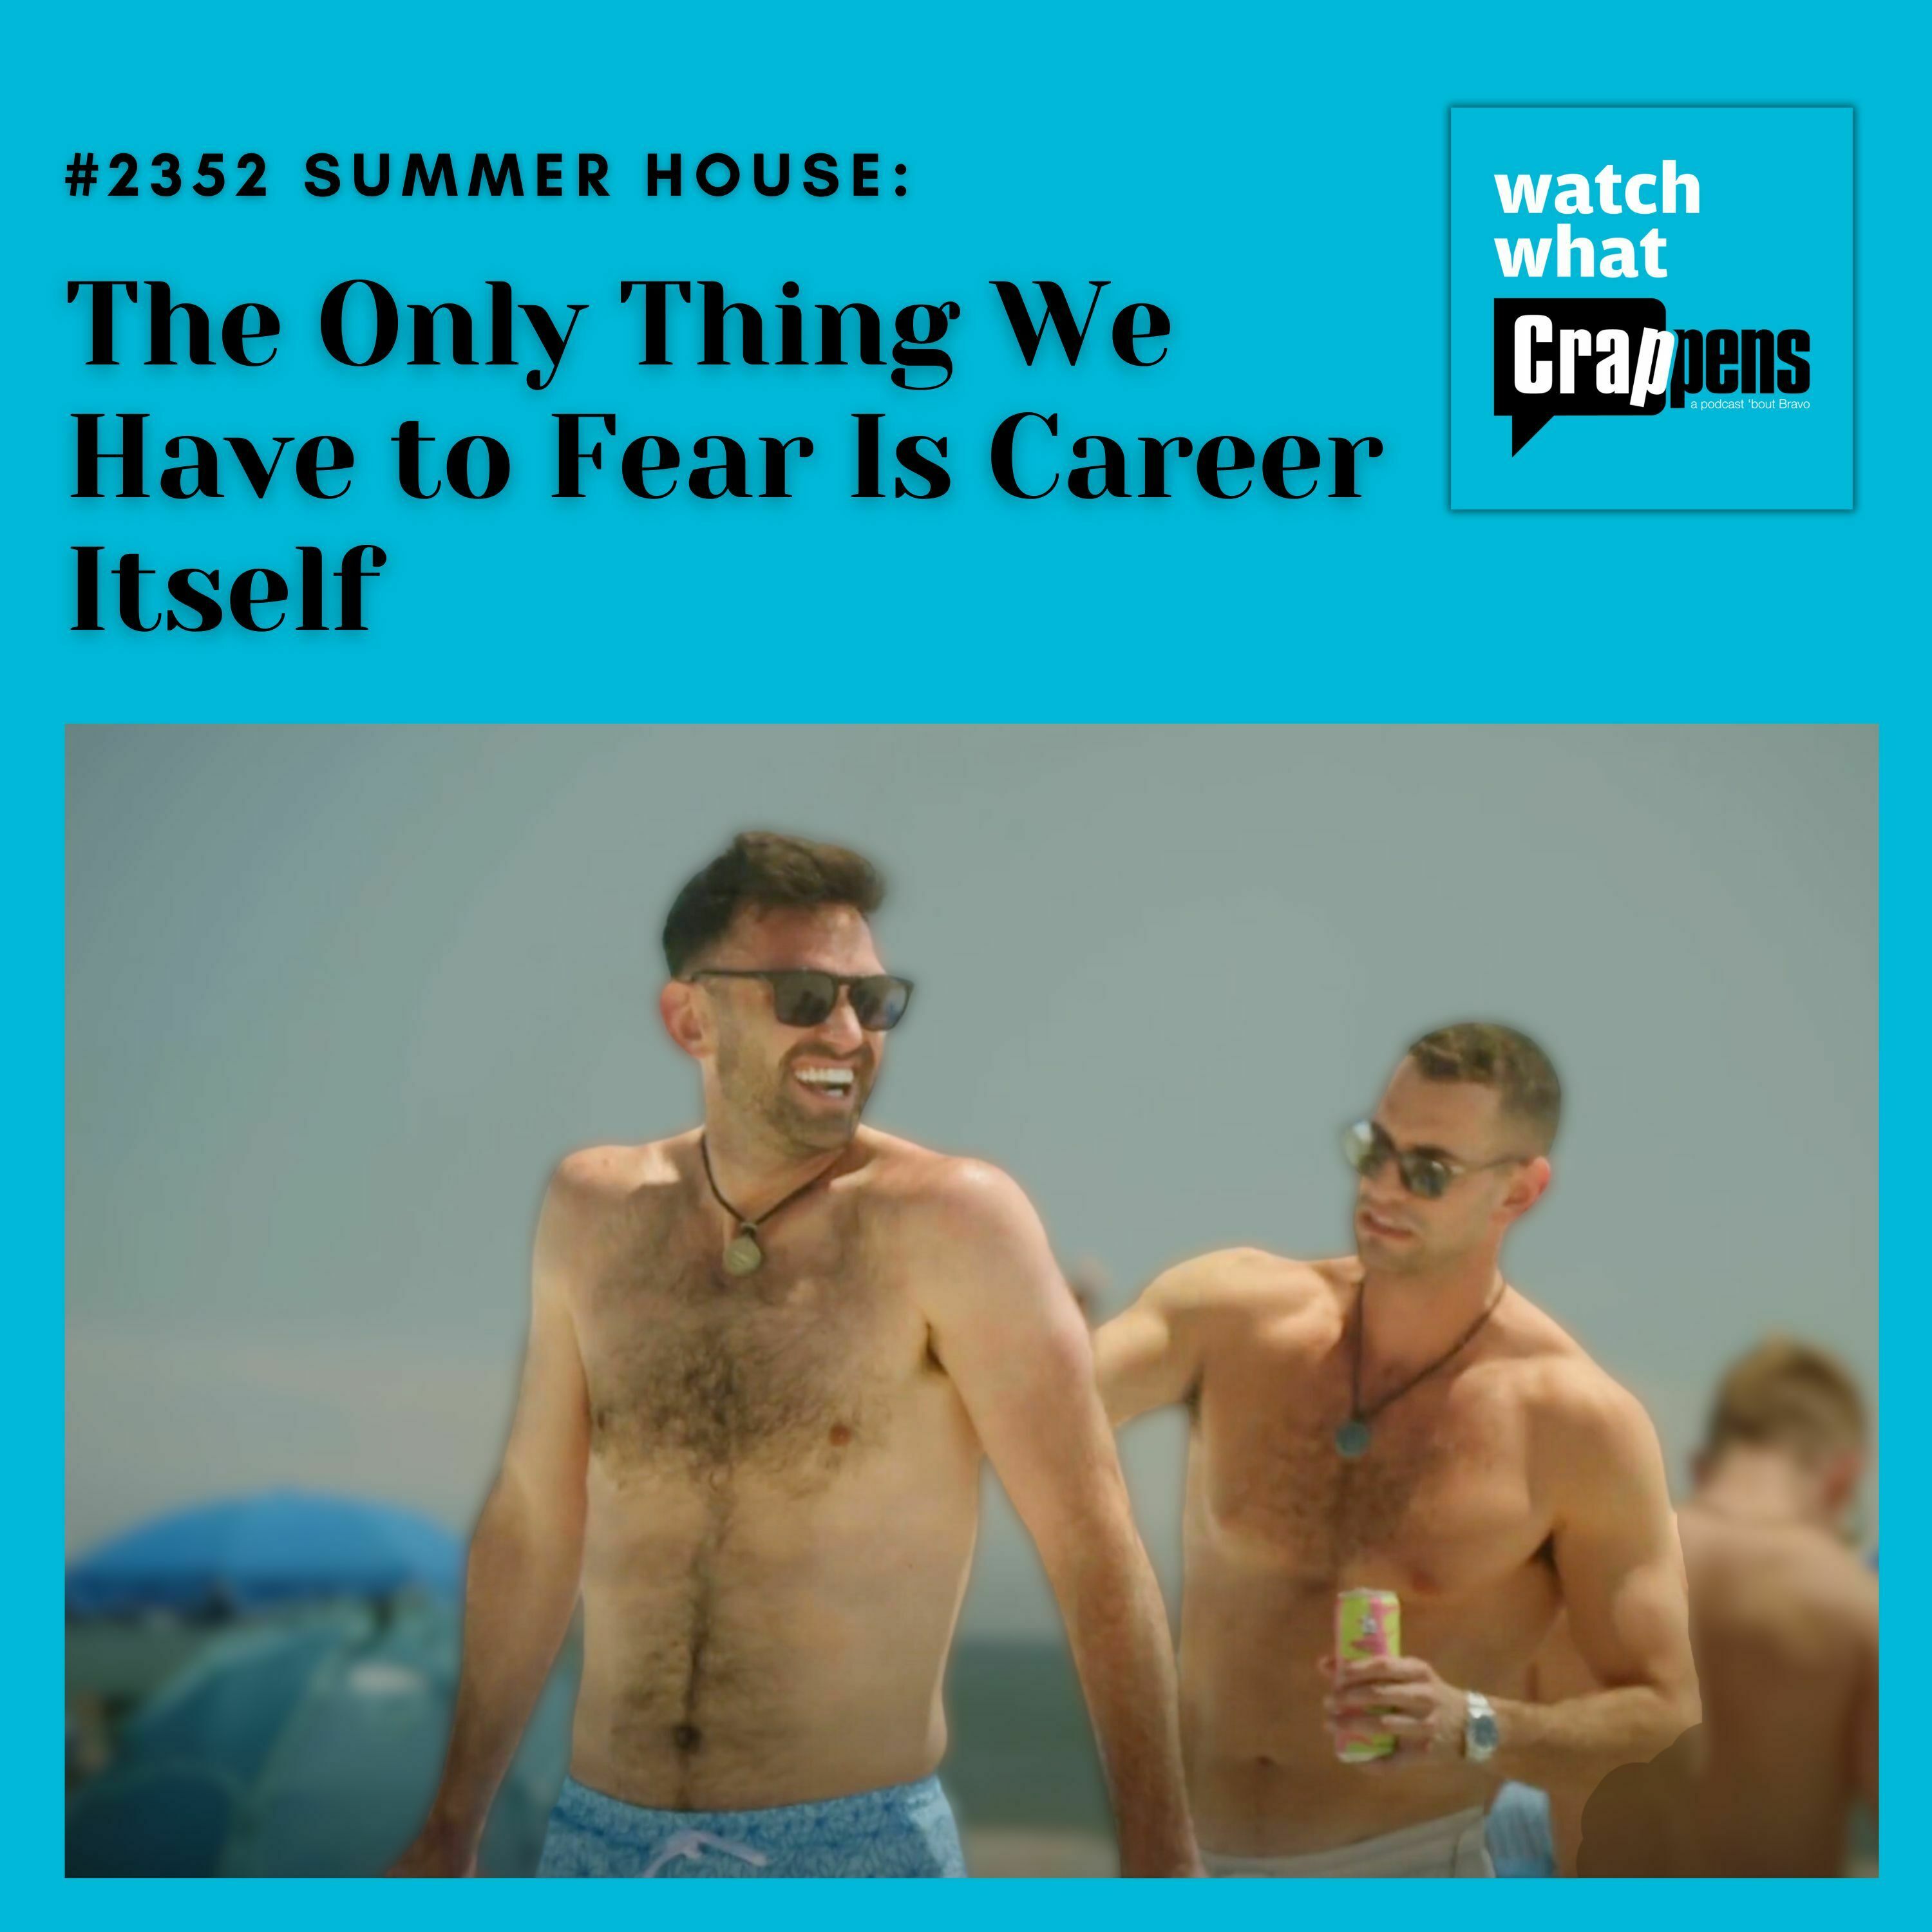 #2352 Summer House: The Only Thing We Have to Fear Is Career Itself